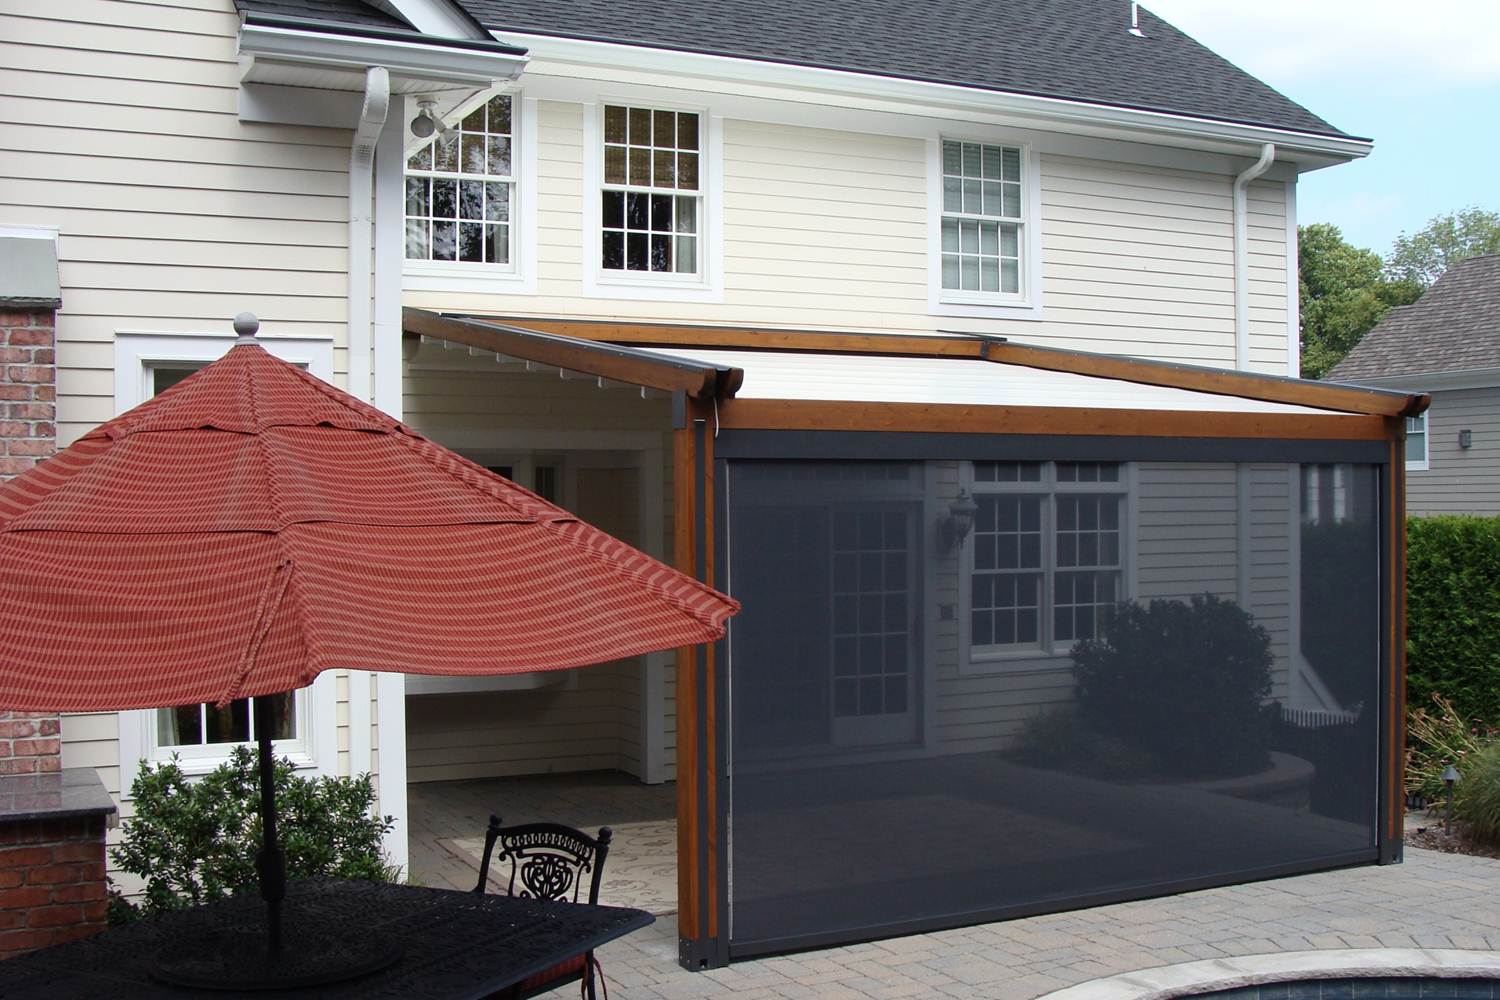 Retractable Awnings: To Retract or Not to Retract That Is the Question  Window Works